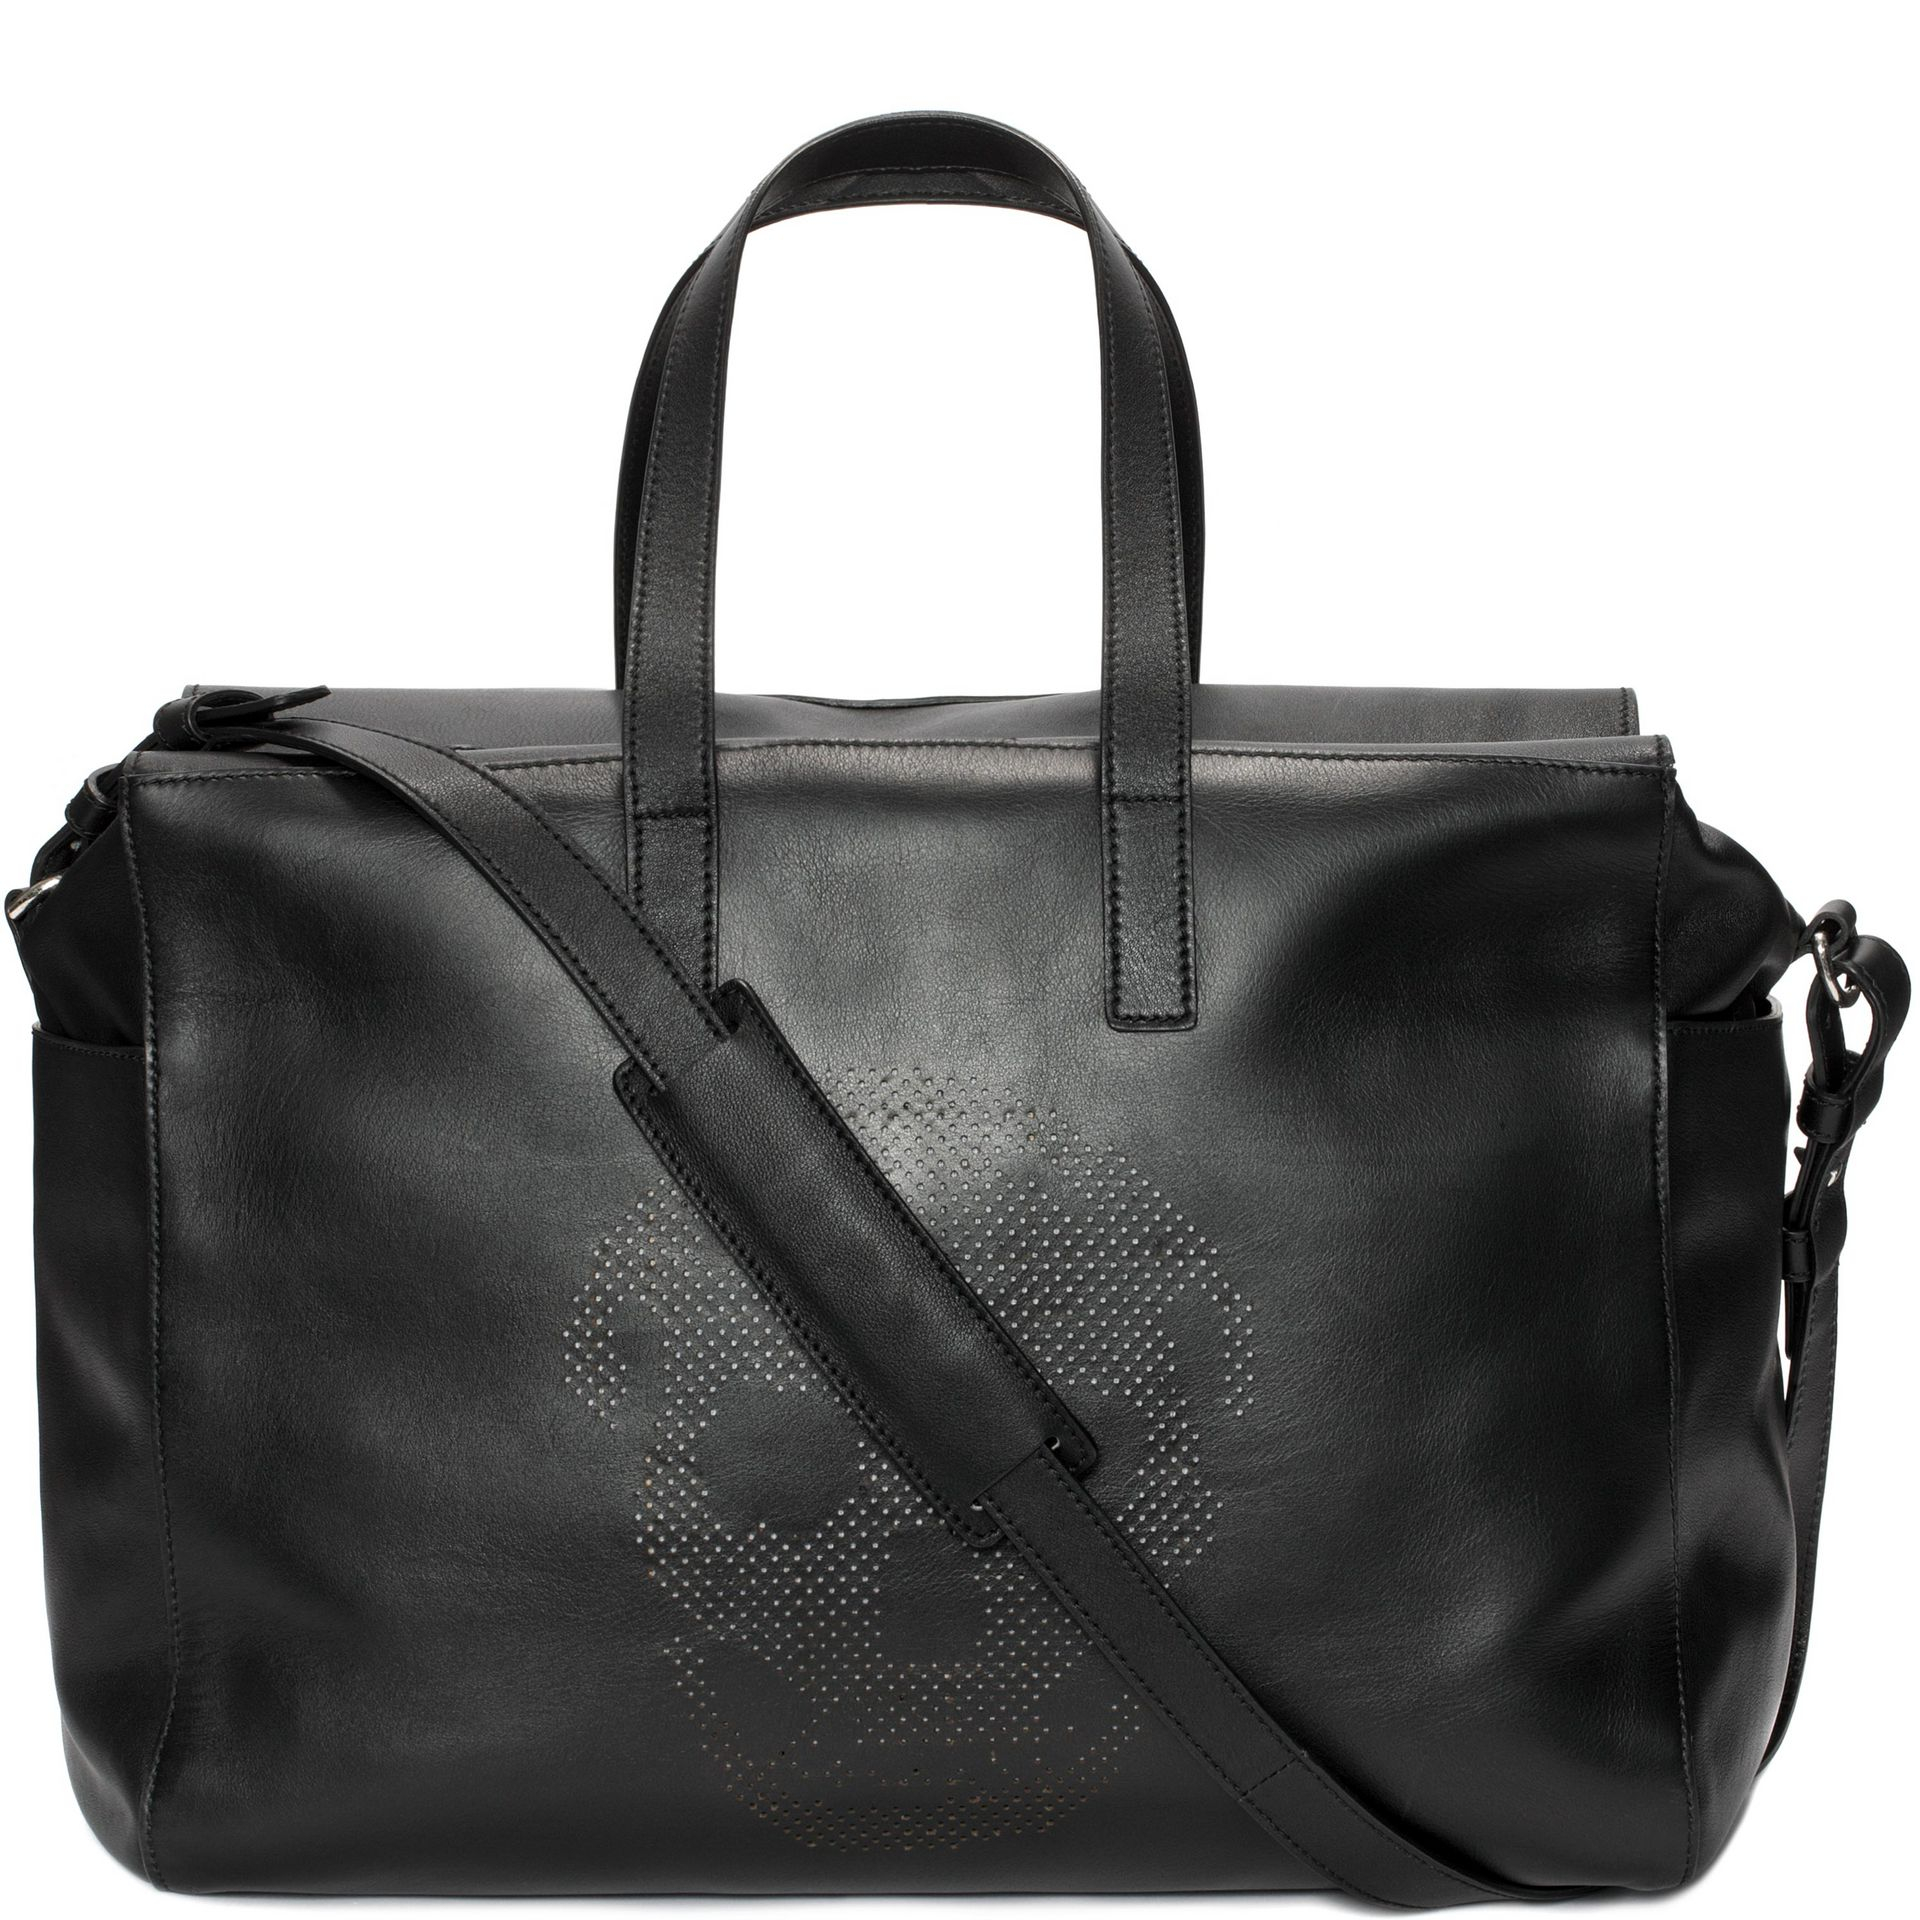 Lyst - Alexander Mcqueen Leather Perforated Skull Duffle Bag in Black ...